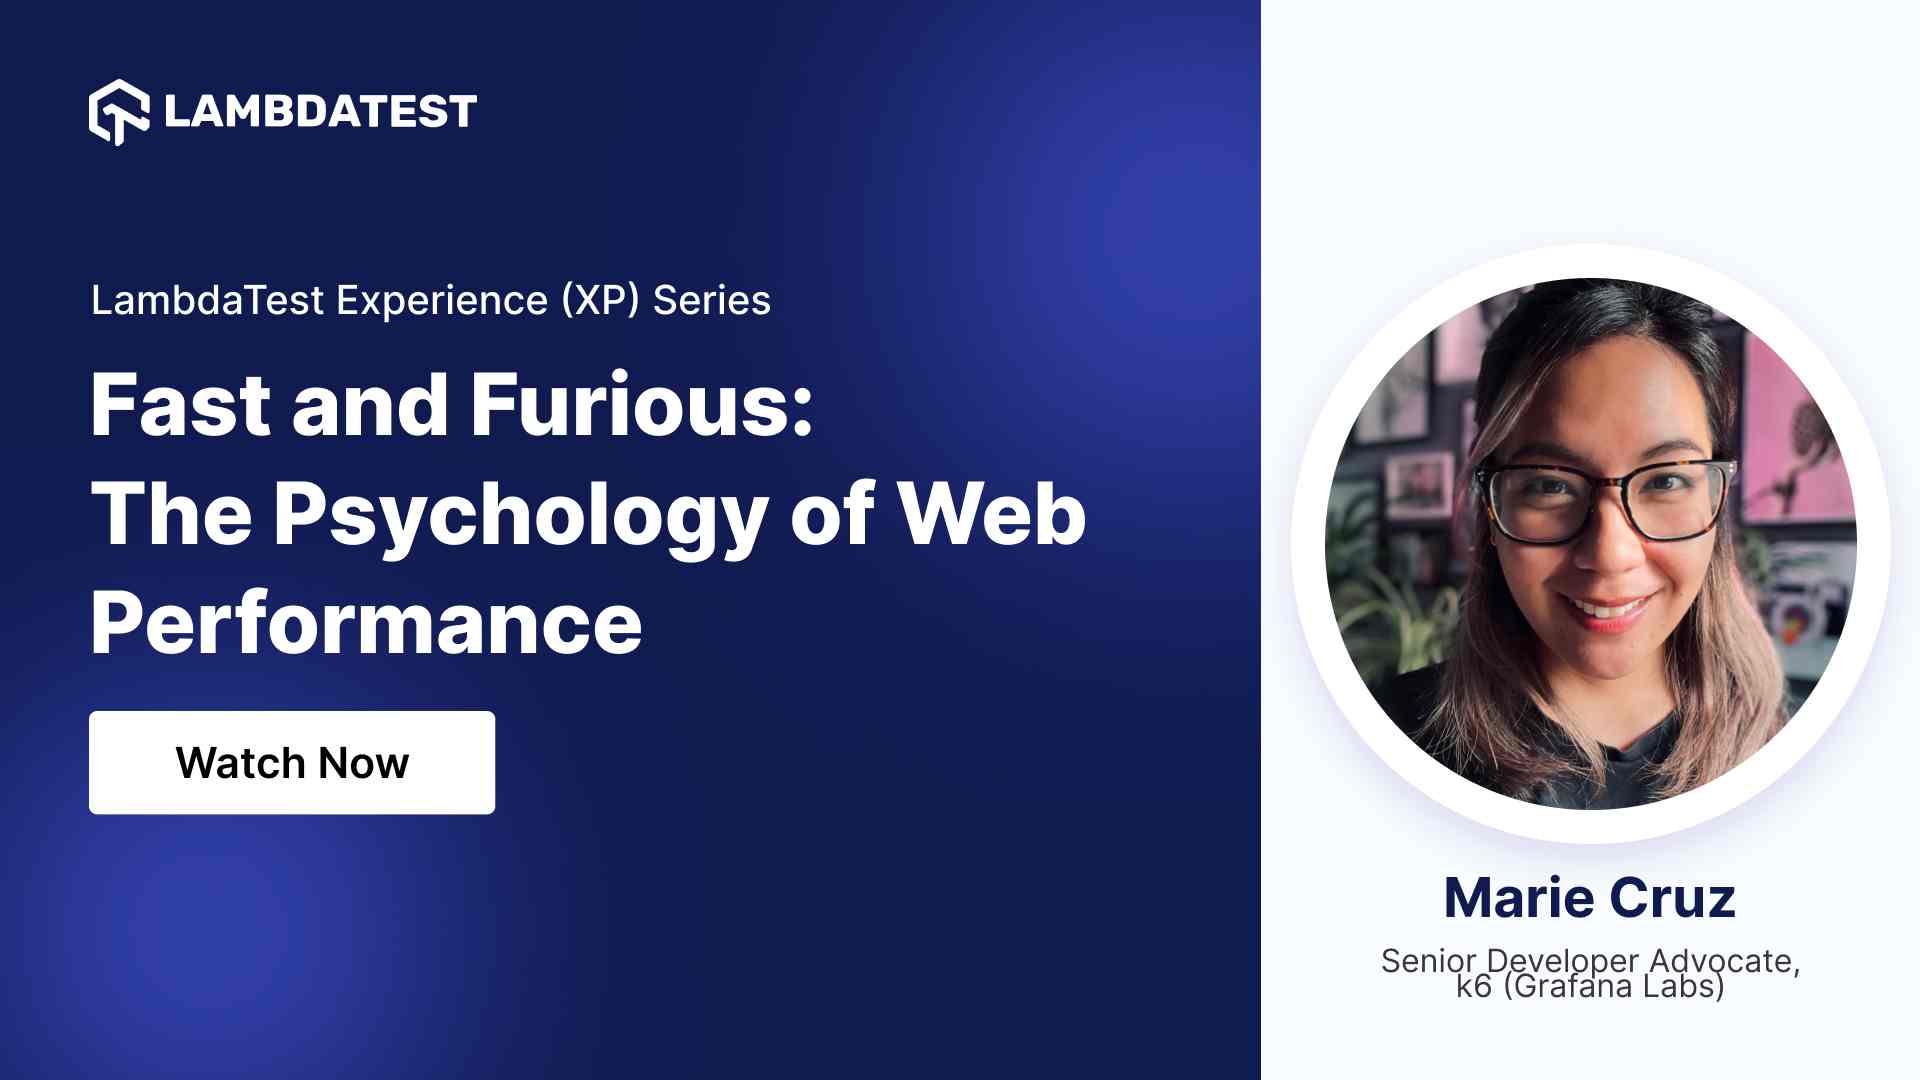 Fast and Furious: The Psychology of Web Performance